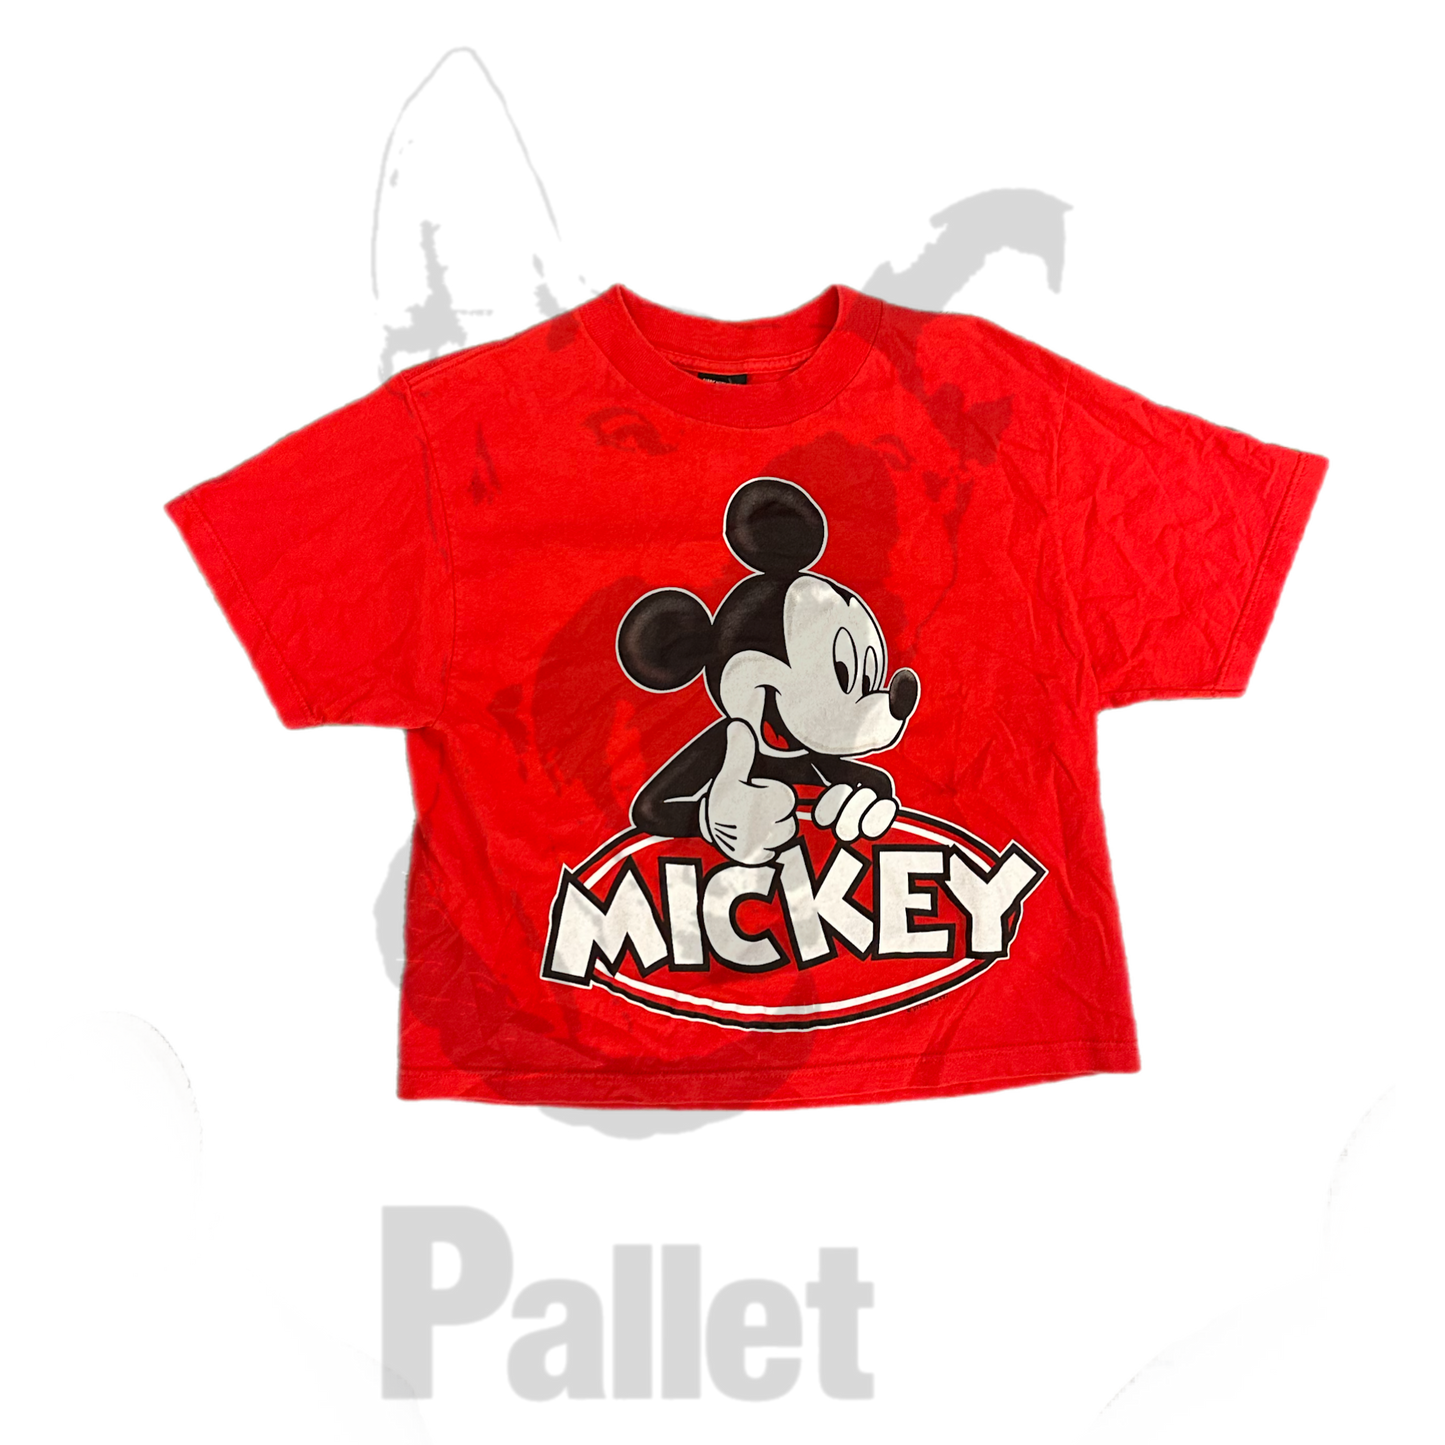 Vintage -" Mickey Thumbs Up Red Tee"- Size Small